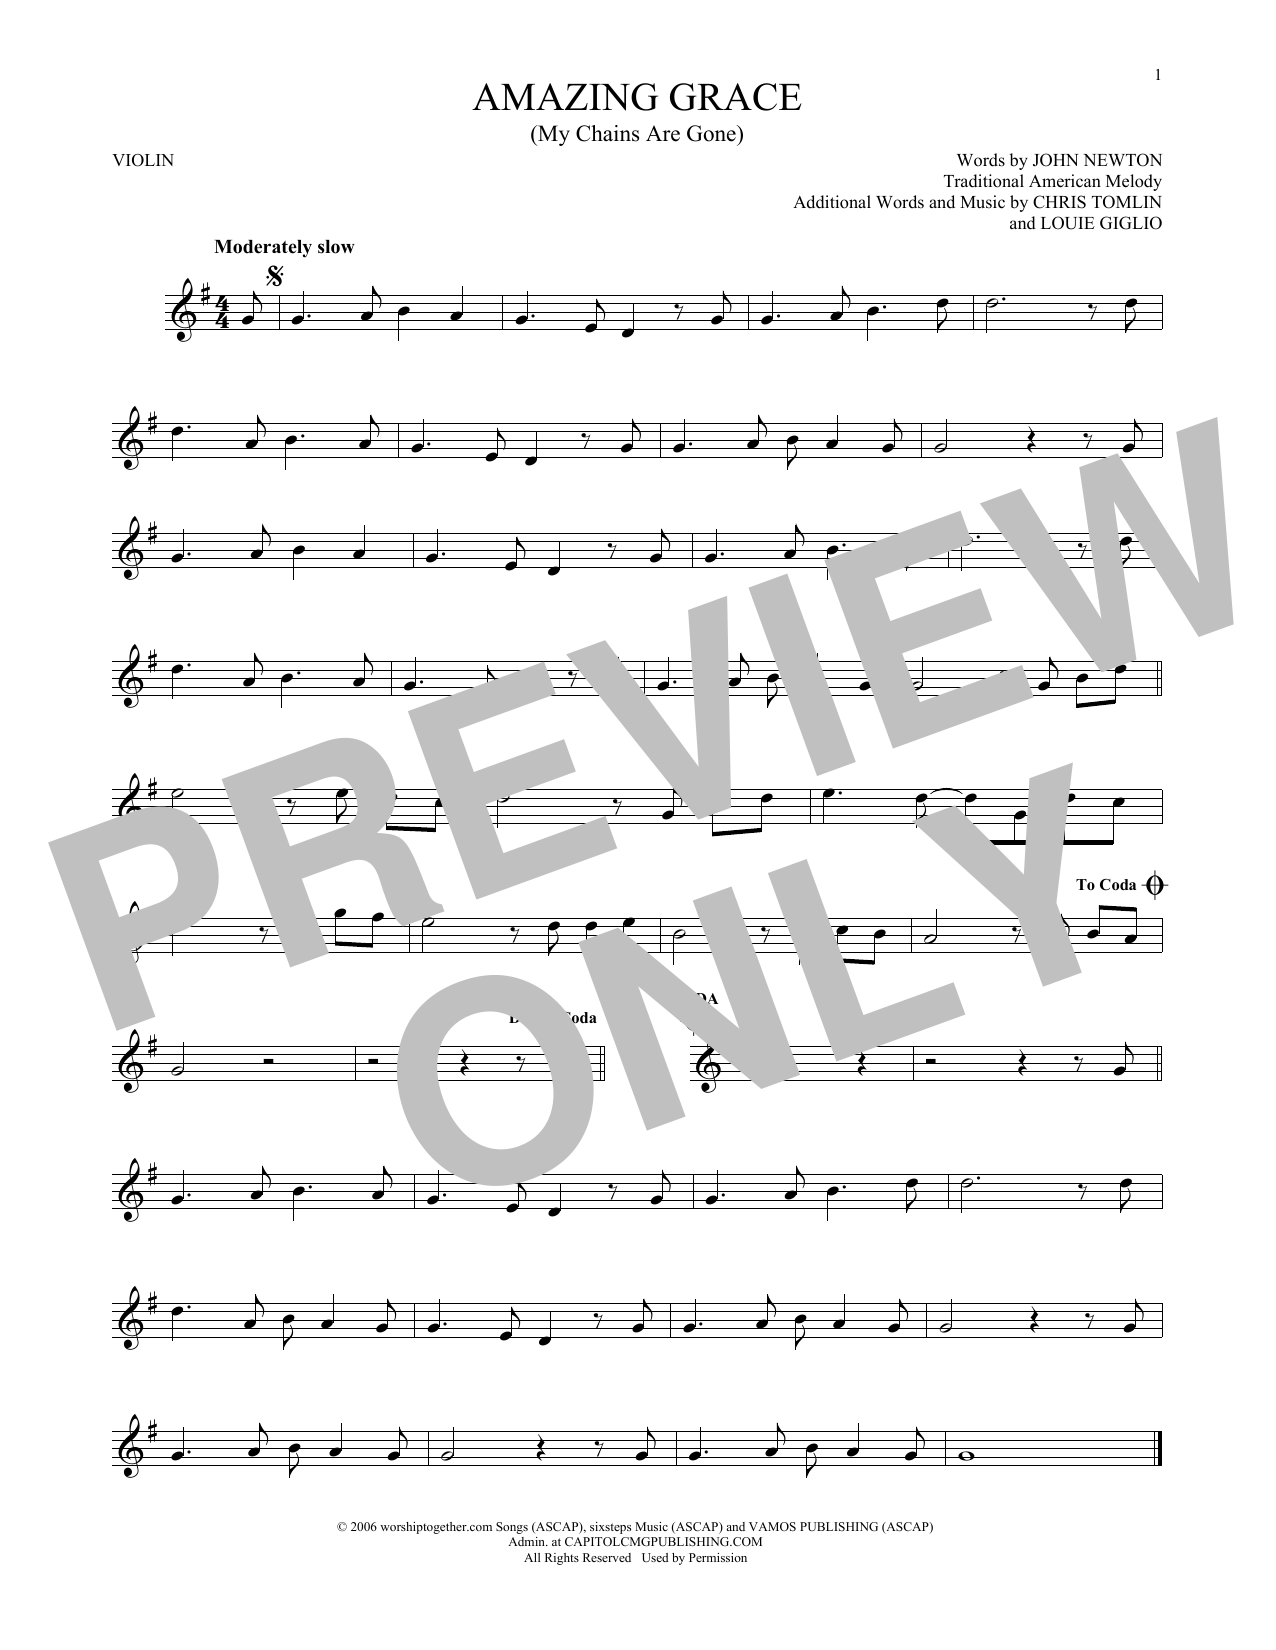 Chris Tomlin Amazing Grace (My Chains Are Gone) sheet music notes printable PDF score